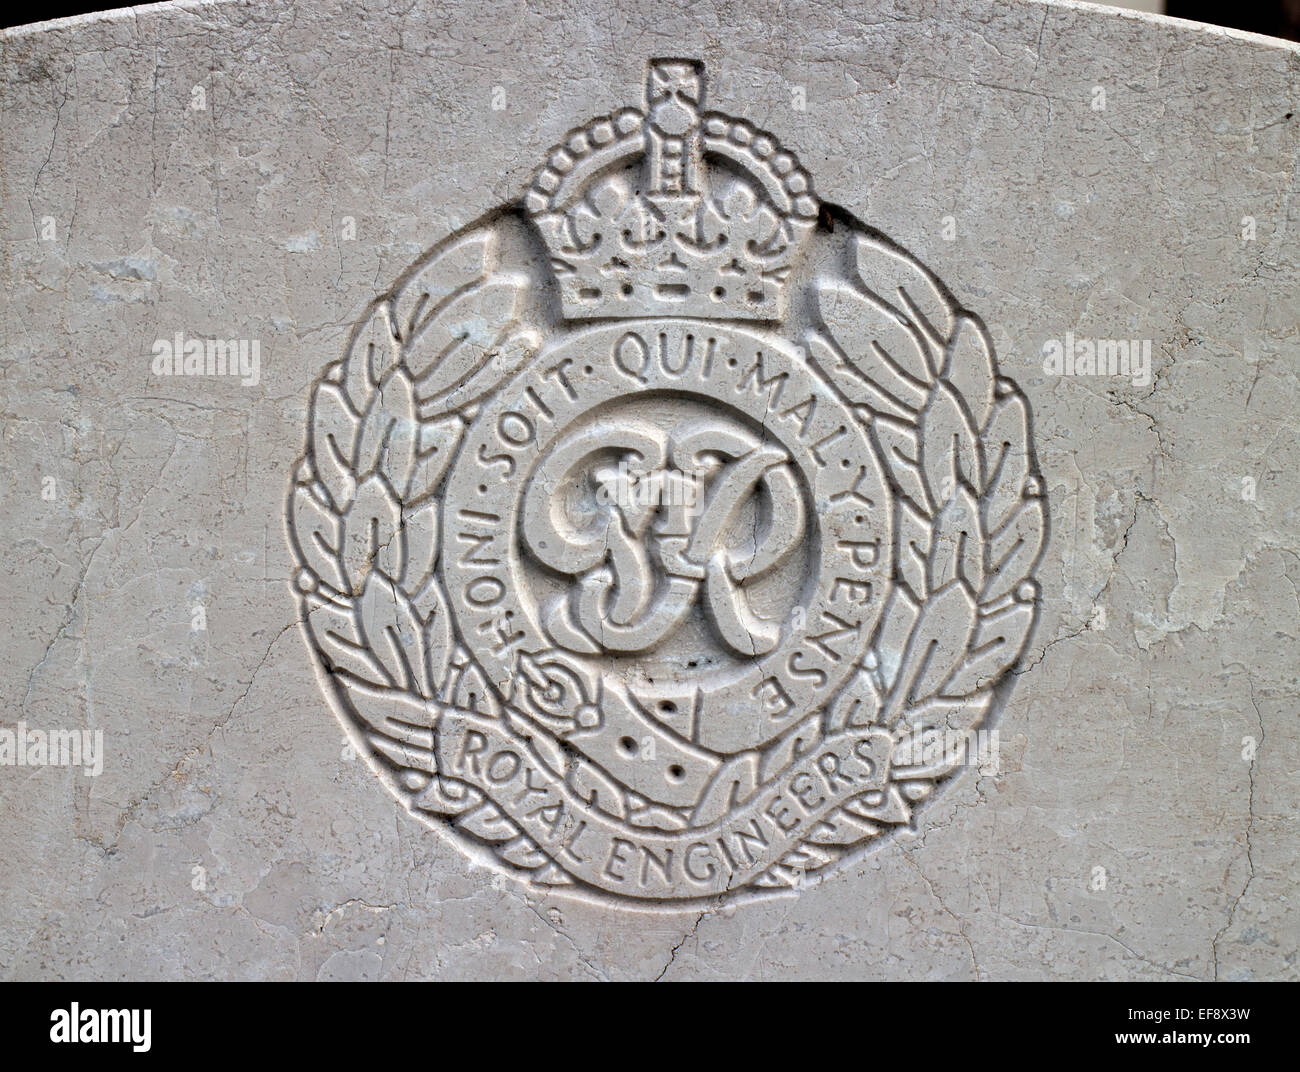 The Royal Engineers emblem on a war grave Stock Photo